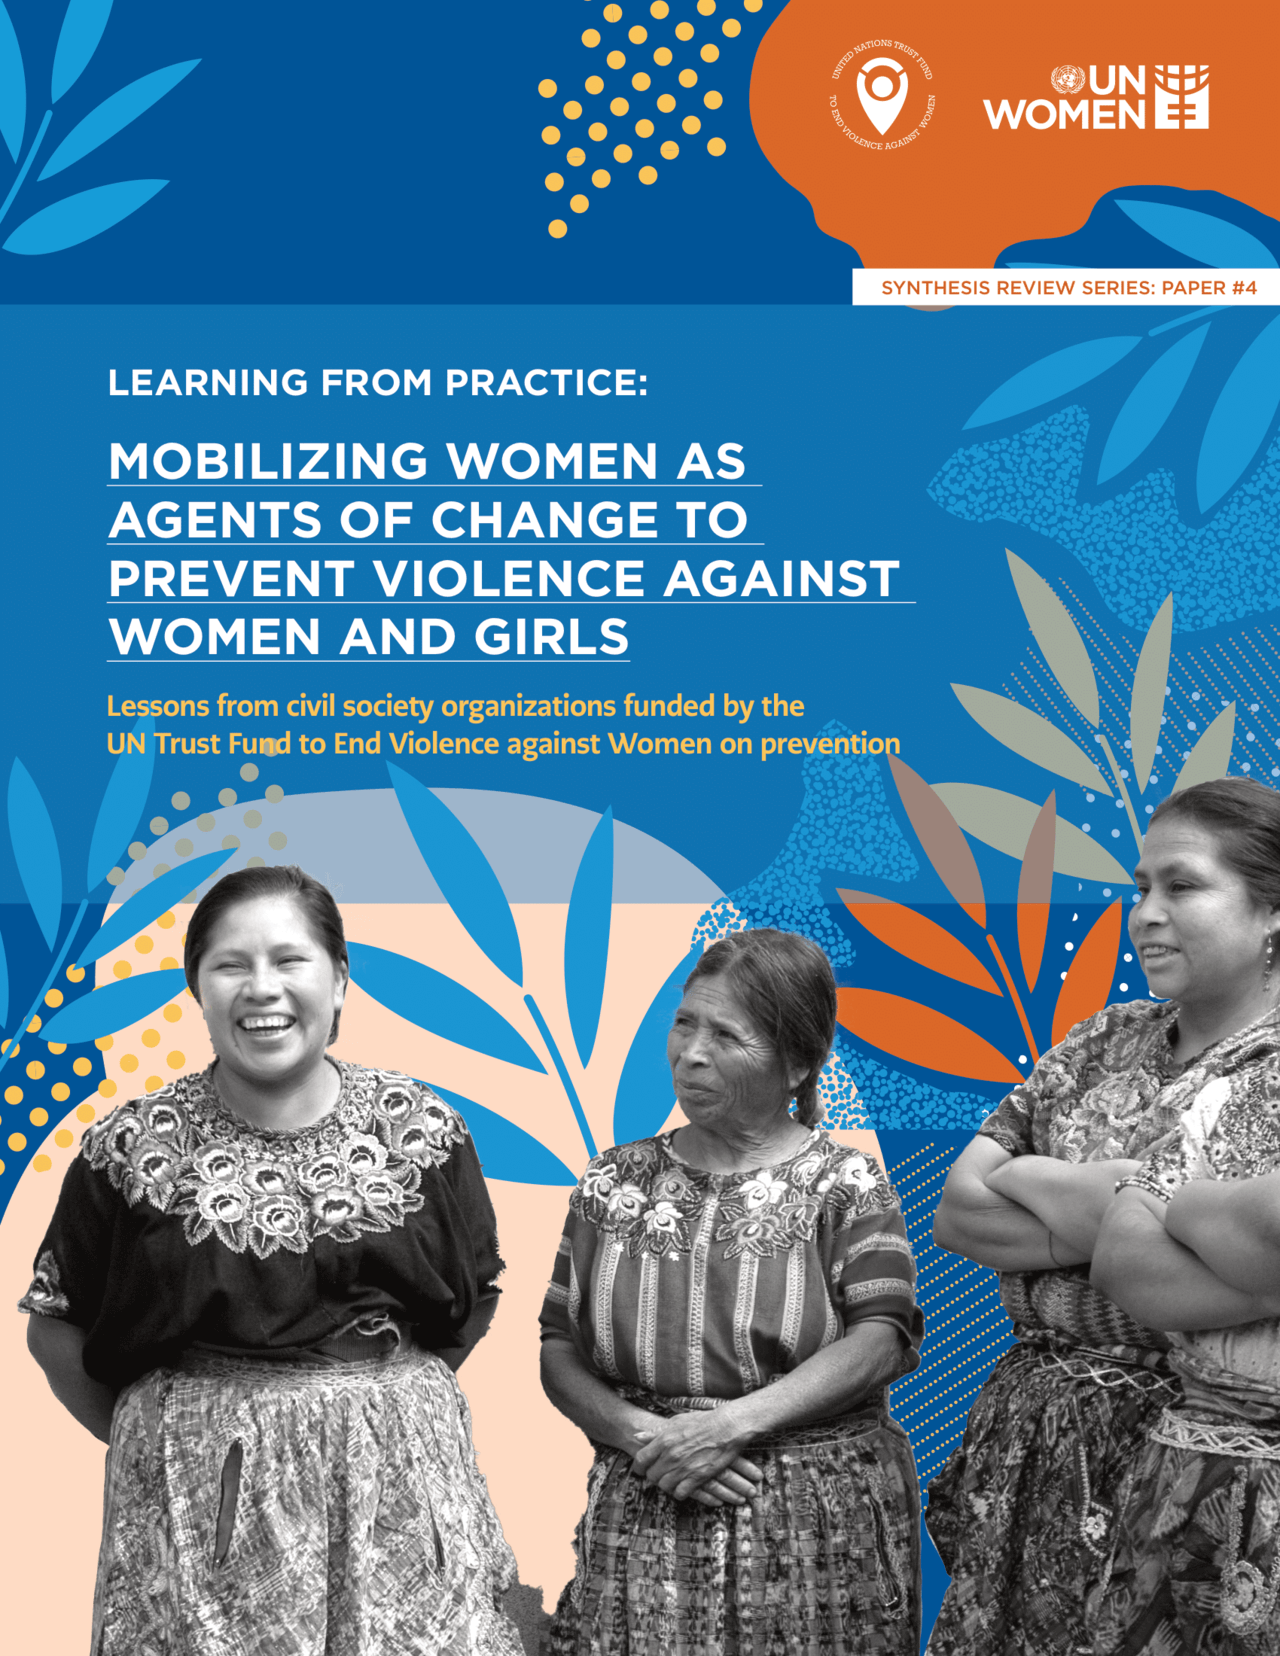 Learning from practice: Mobilizing women as agents of change to prevent violence against women and girls